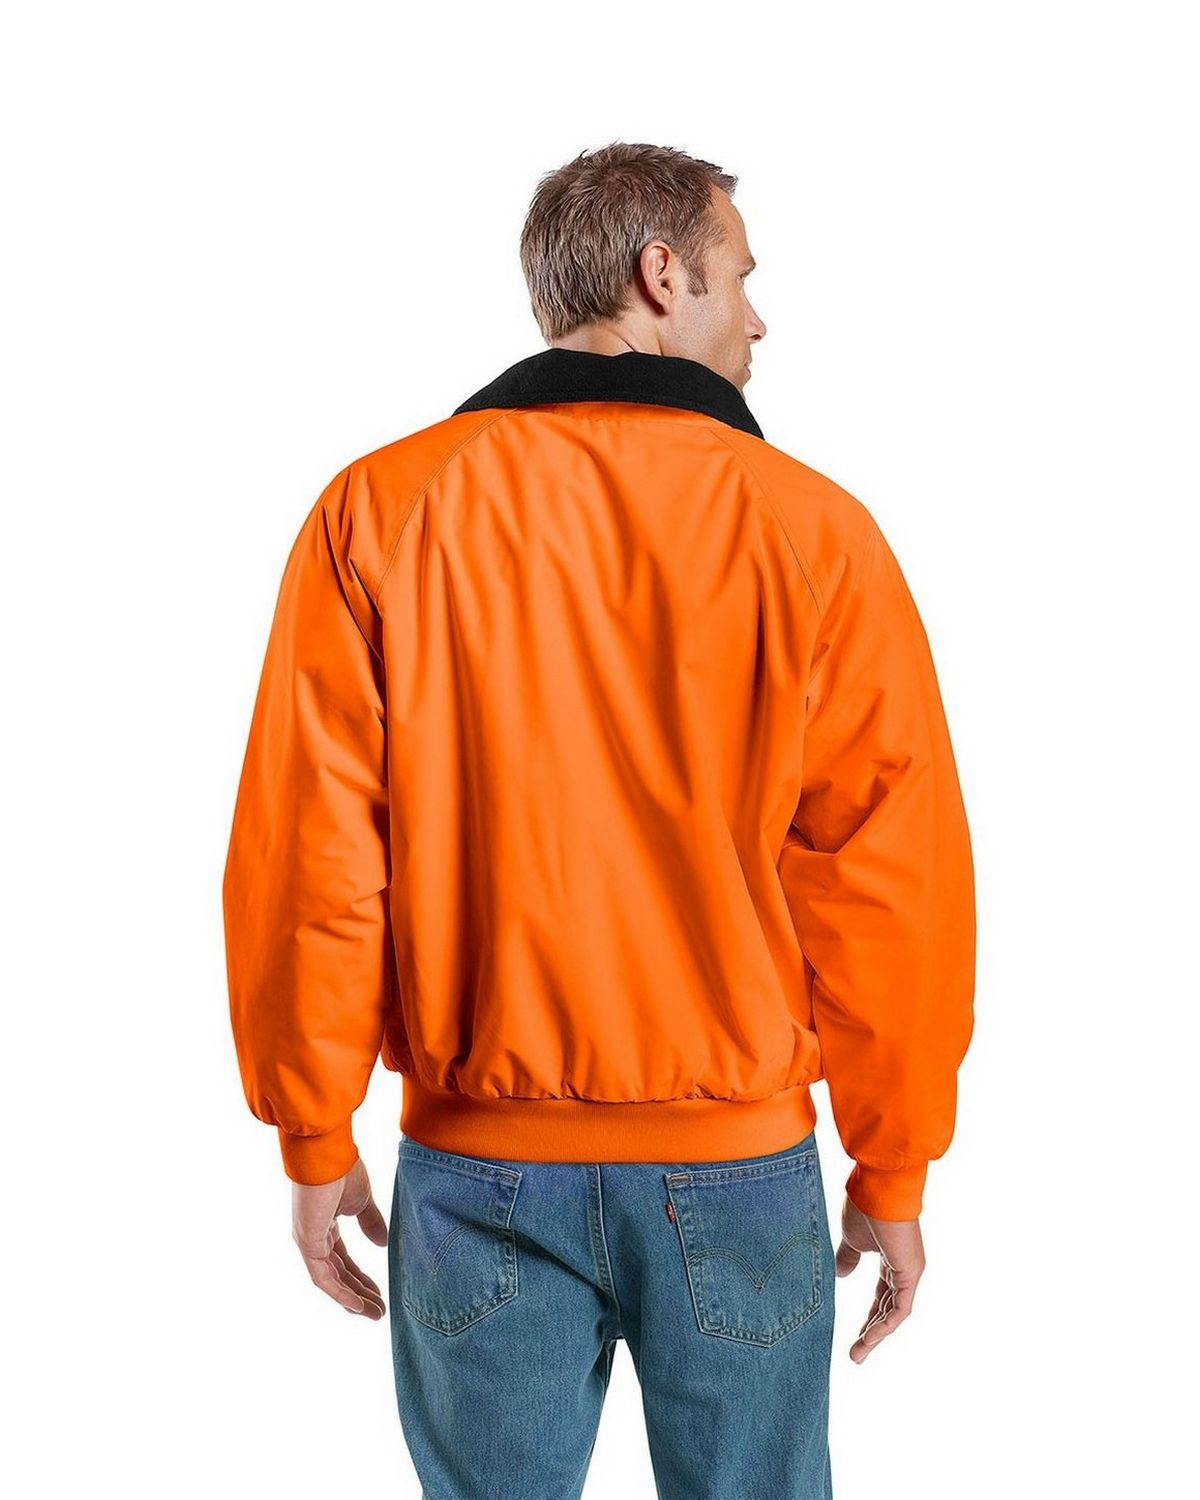 Port Authority J754S Safety Challenger Jacket - ApparelnBags.com